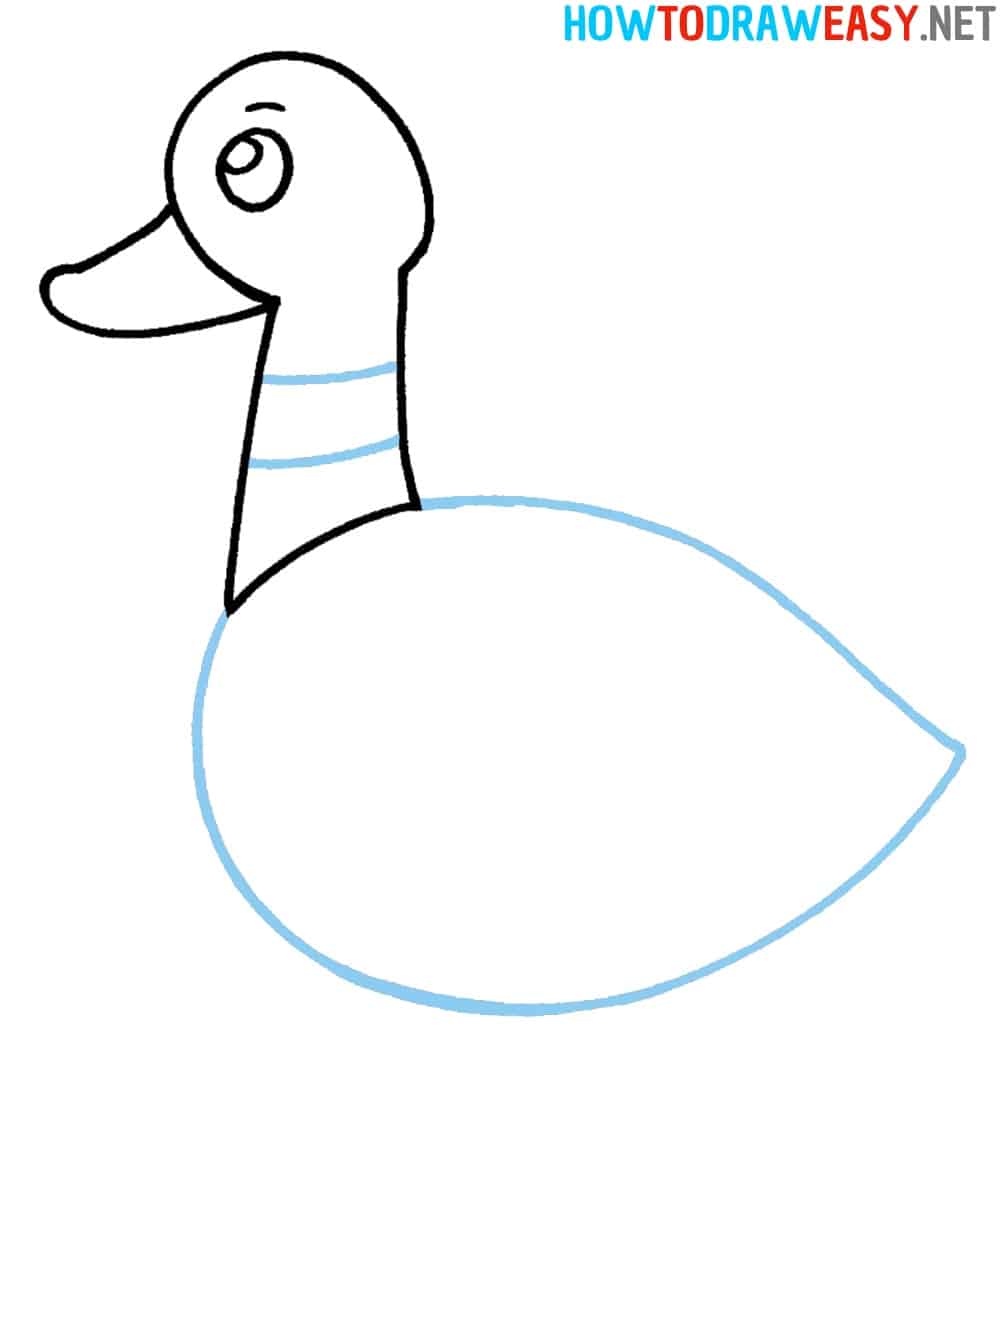 How to Draw a Duck Body